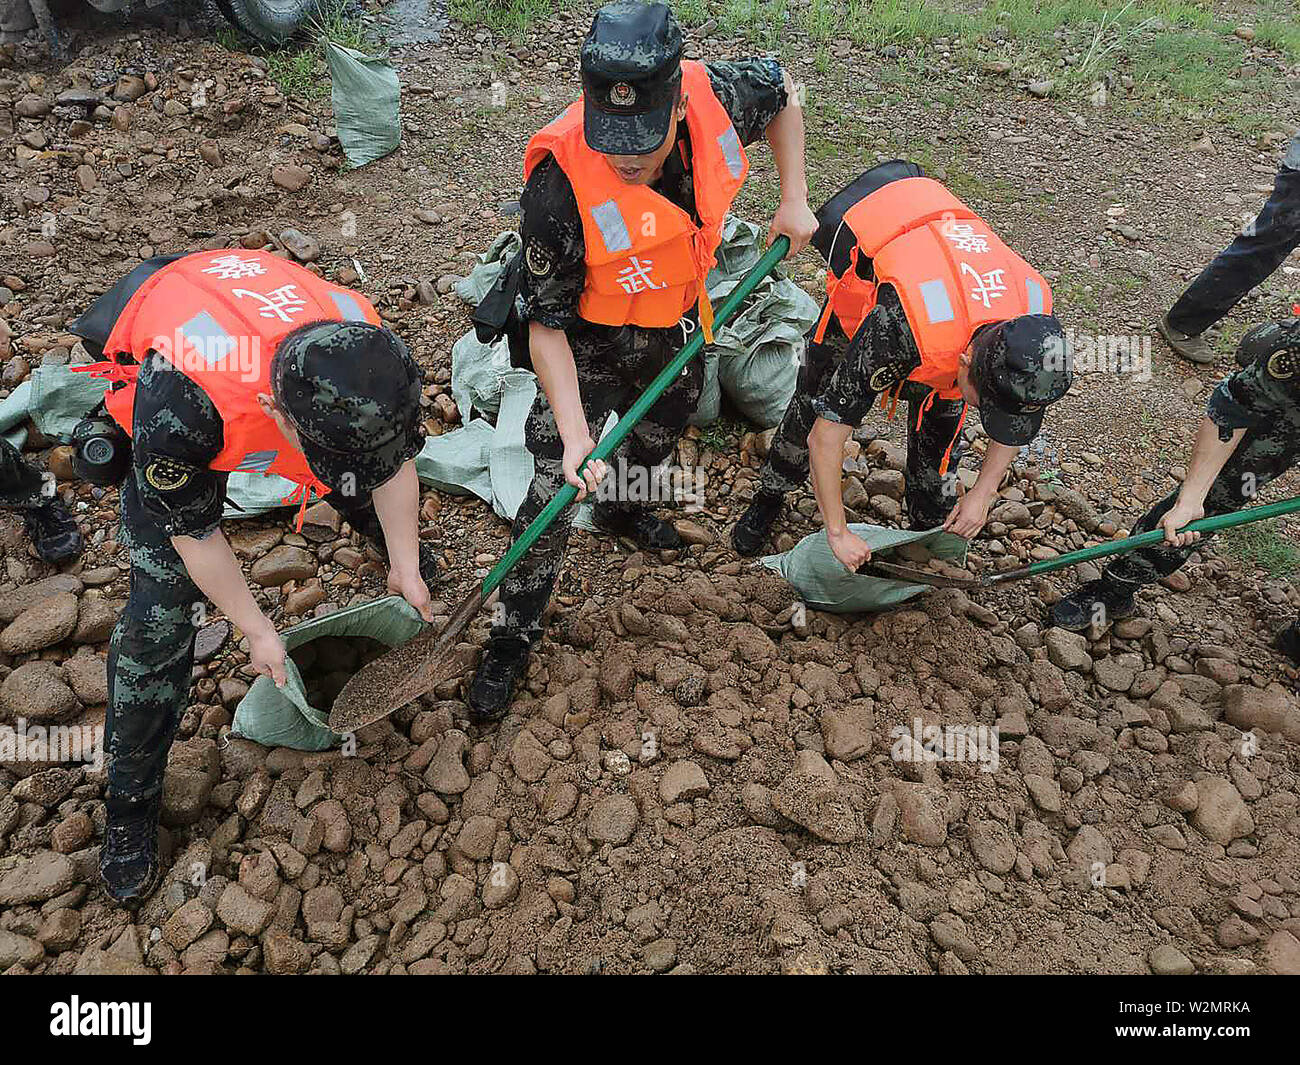 (190710) -- YINGTAN, July 10, 2019 (Xinhua) -- Rescuers fill in sandbags against the flood at the site of the collapsed Maquan Dyke at Maquan Township in Yingtan, east China's Jiangxi Province, July 9, 2019. The Maquan Dyke in Maquan Township collapsed due to heavy rainstorms on Tuesday. (Photo by Wang Bin/Xinhua) Stock Photo